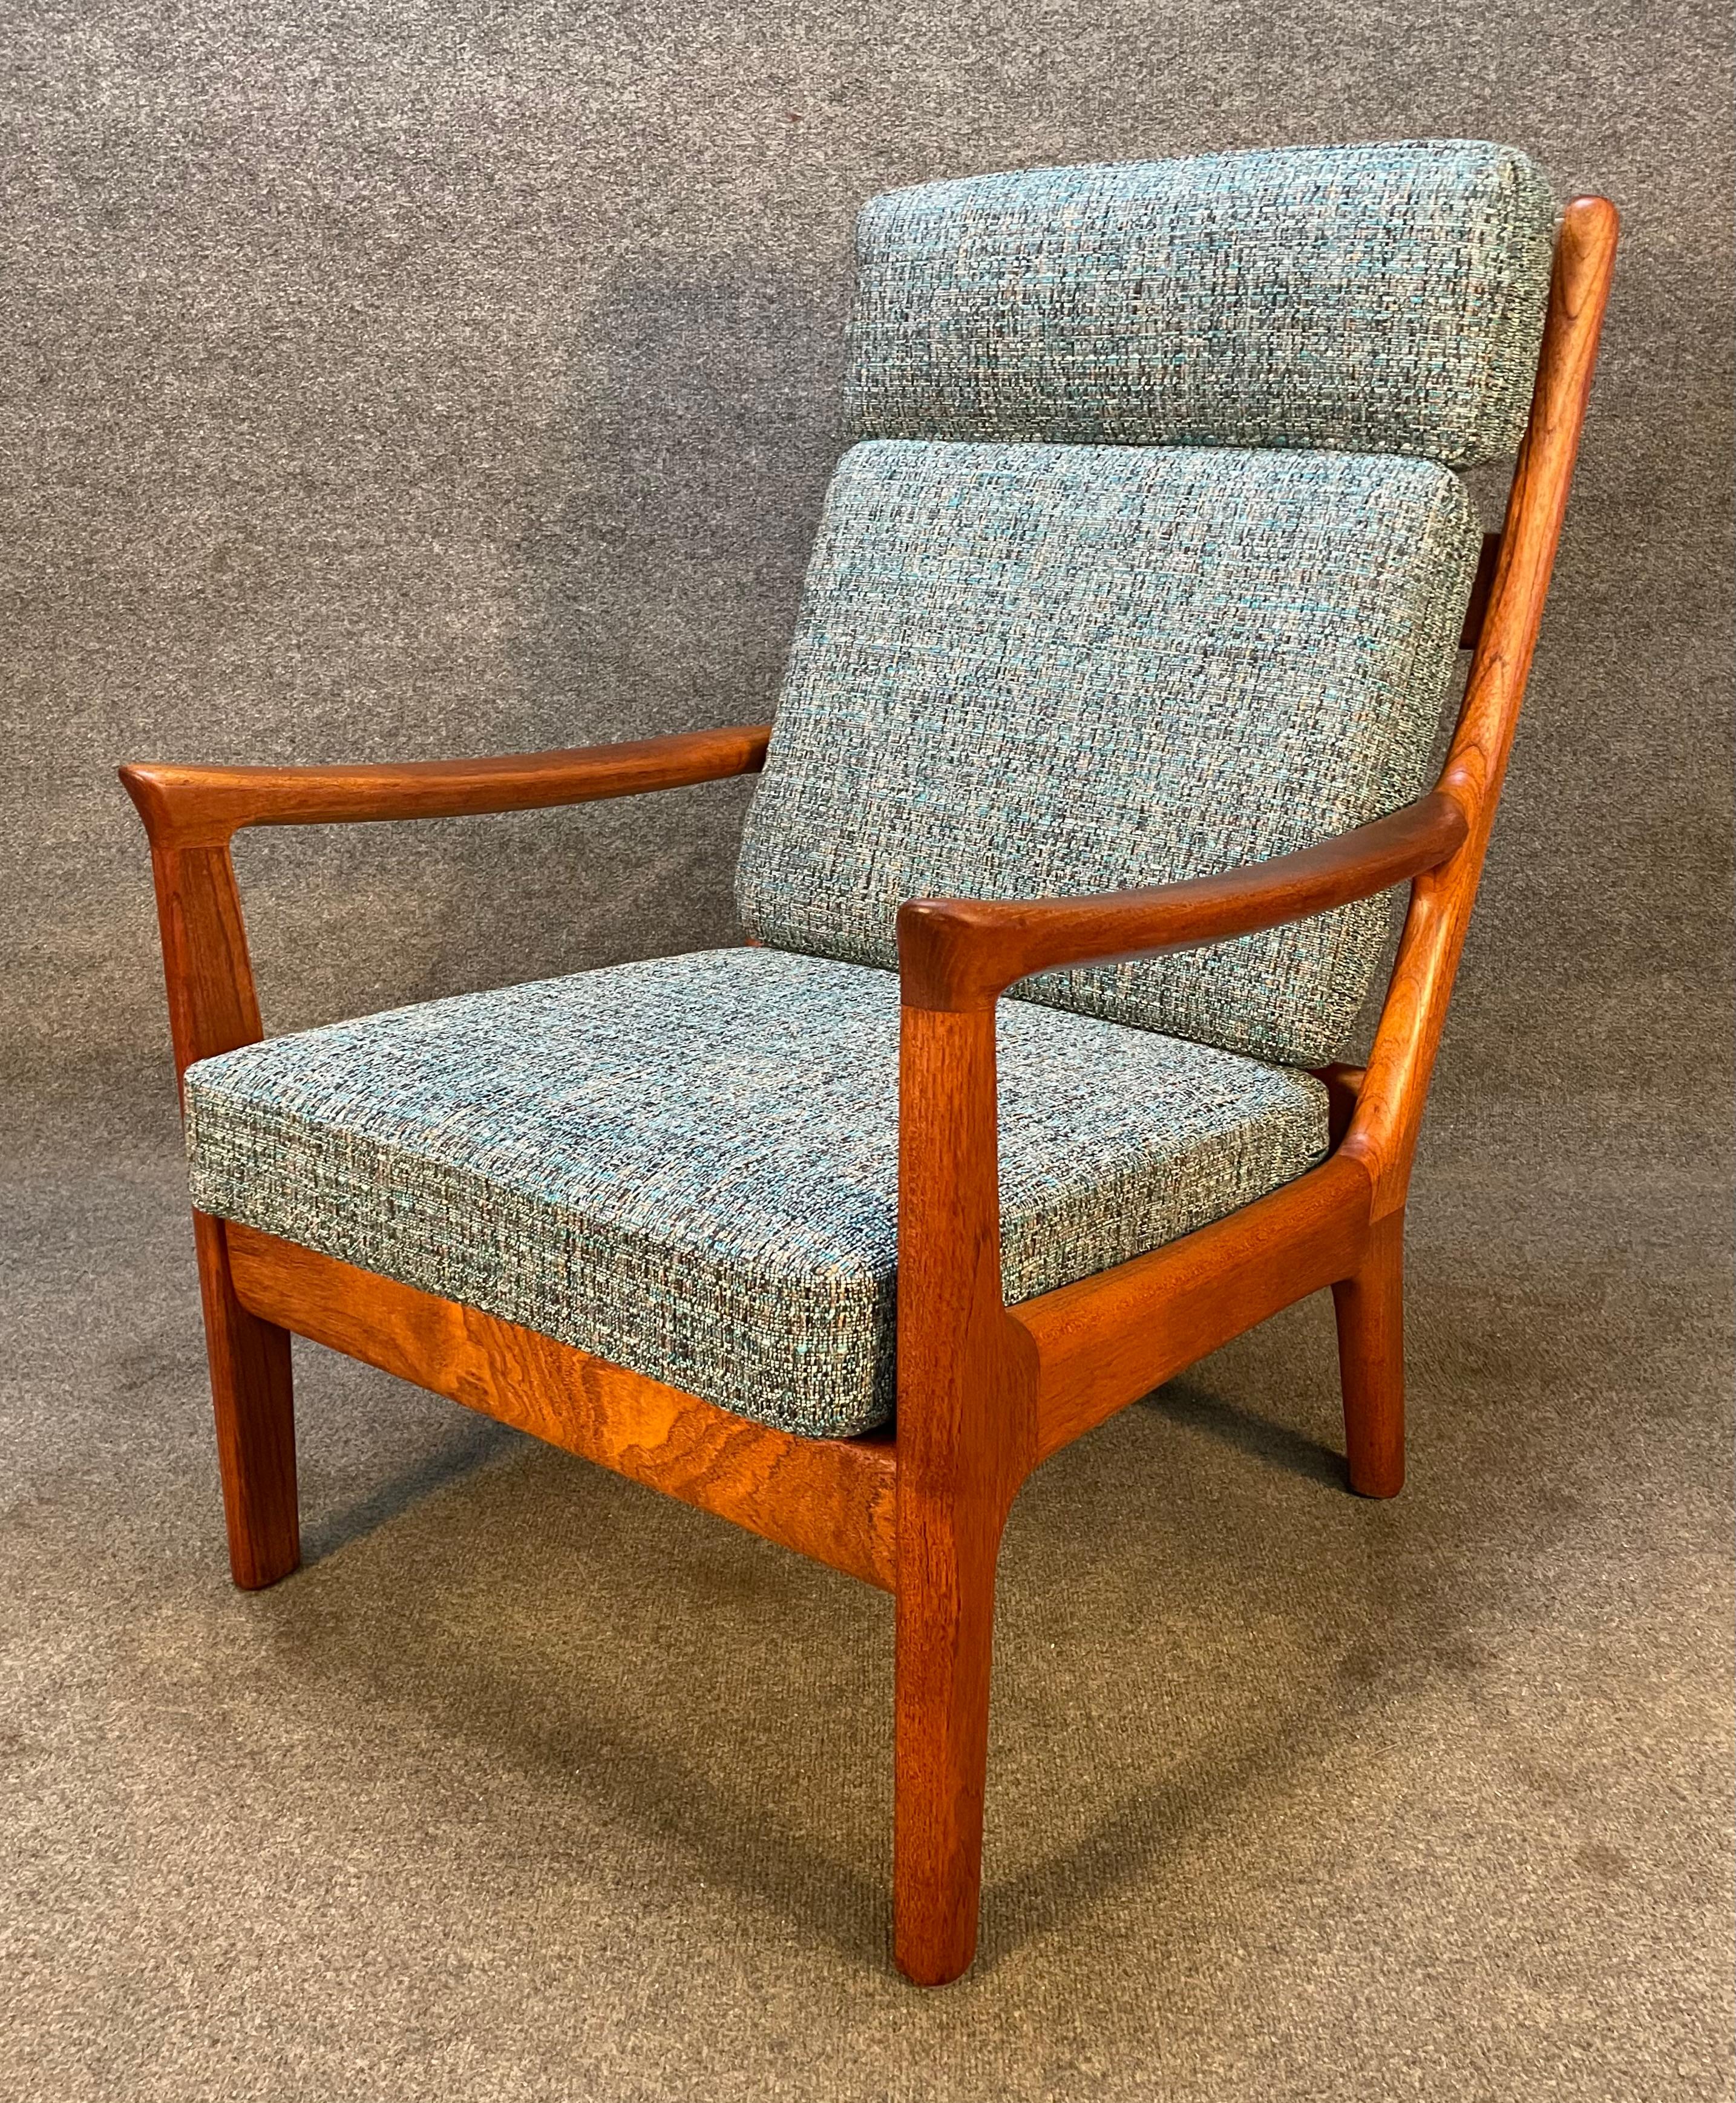 Here is a beautiful 1960's easy chair in solid teak attributed to famed danish designer Ole Wanscher.
This comfortable chair, recently imported from Europe to California, features a cleaned up and well oiled sculptural frame with cushions sporting